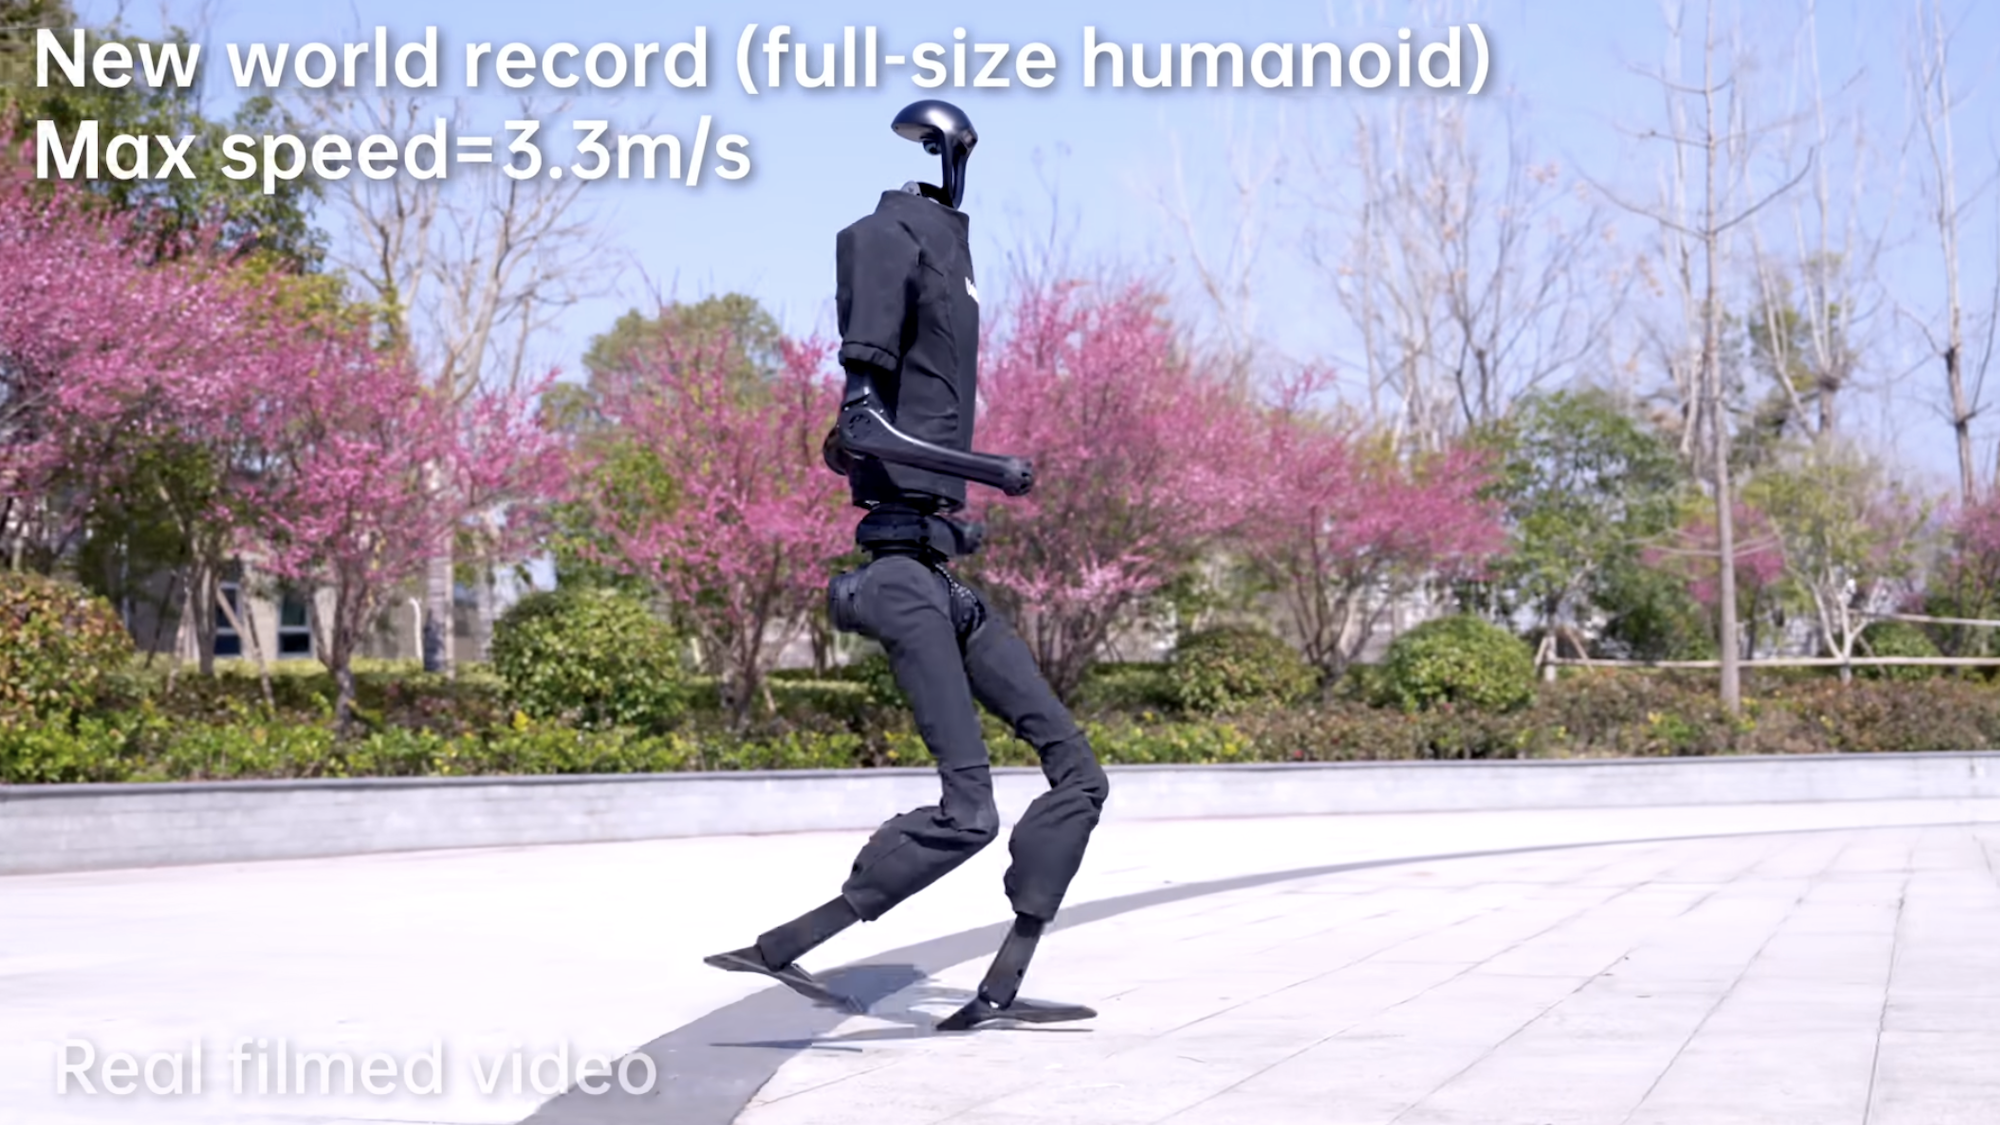 Oh good, the humanoid robots are running even faster now